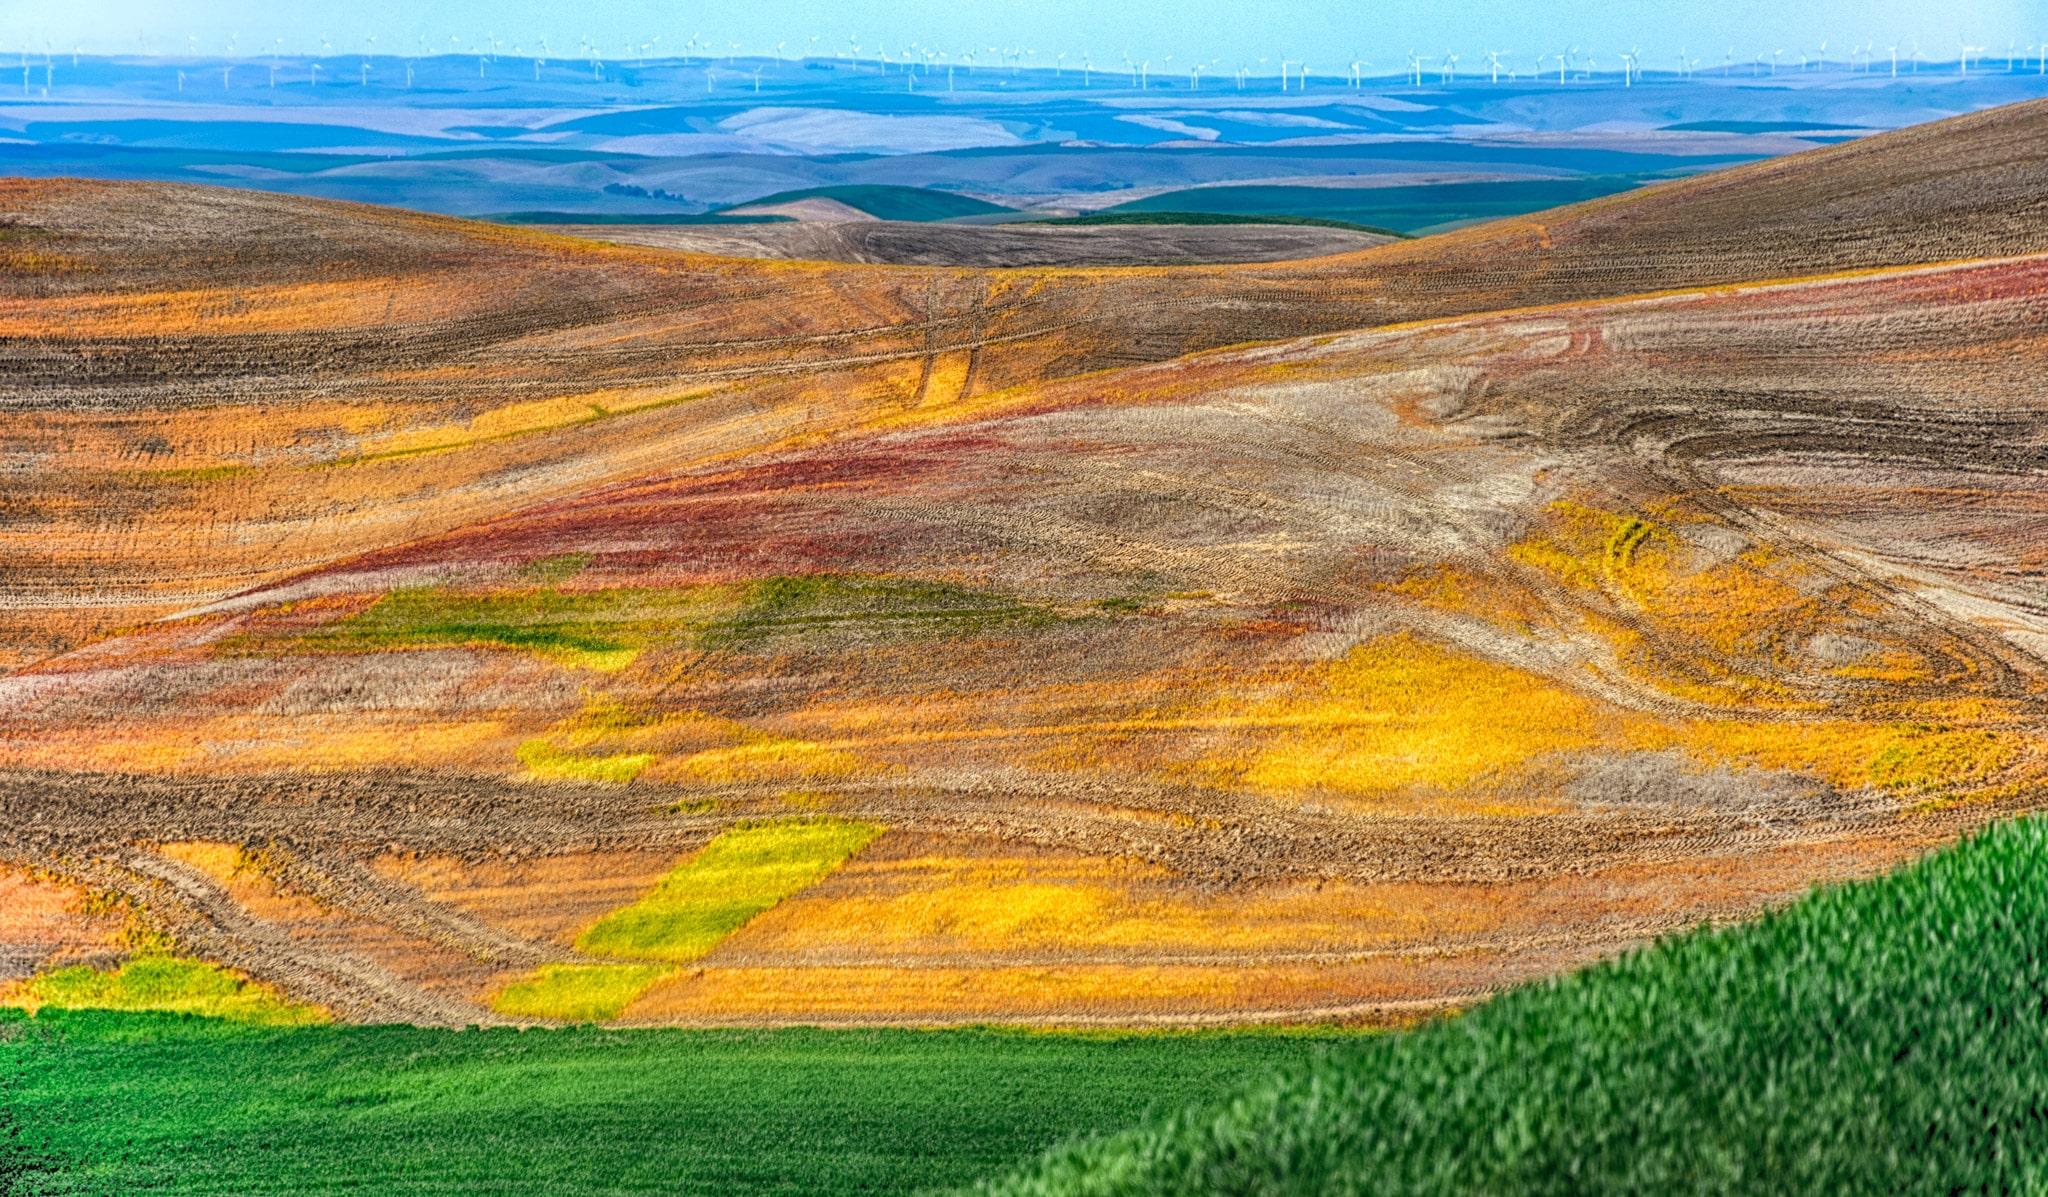 Tractor tracks add texture to newly cultivated fields in the Palouse region of western Washington, near Colfax. In the distance wind turbines catch the prevaling winds.